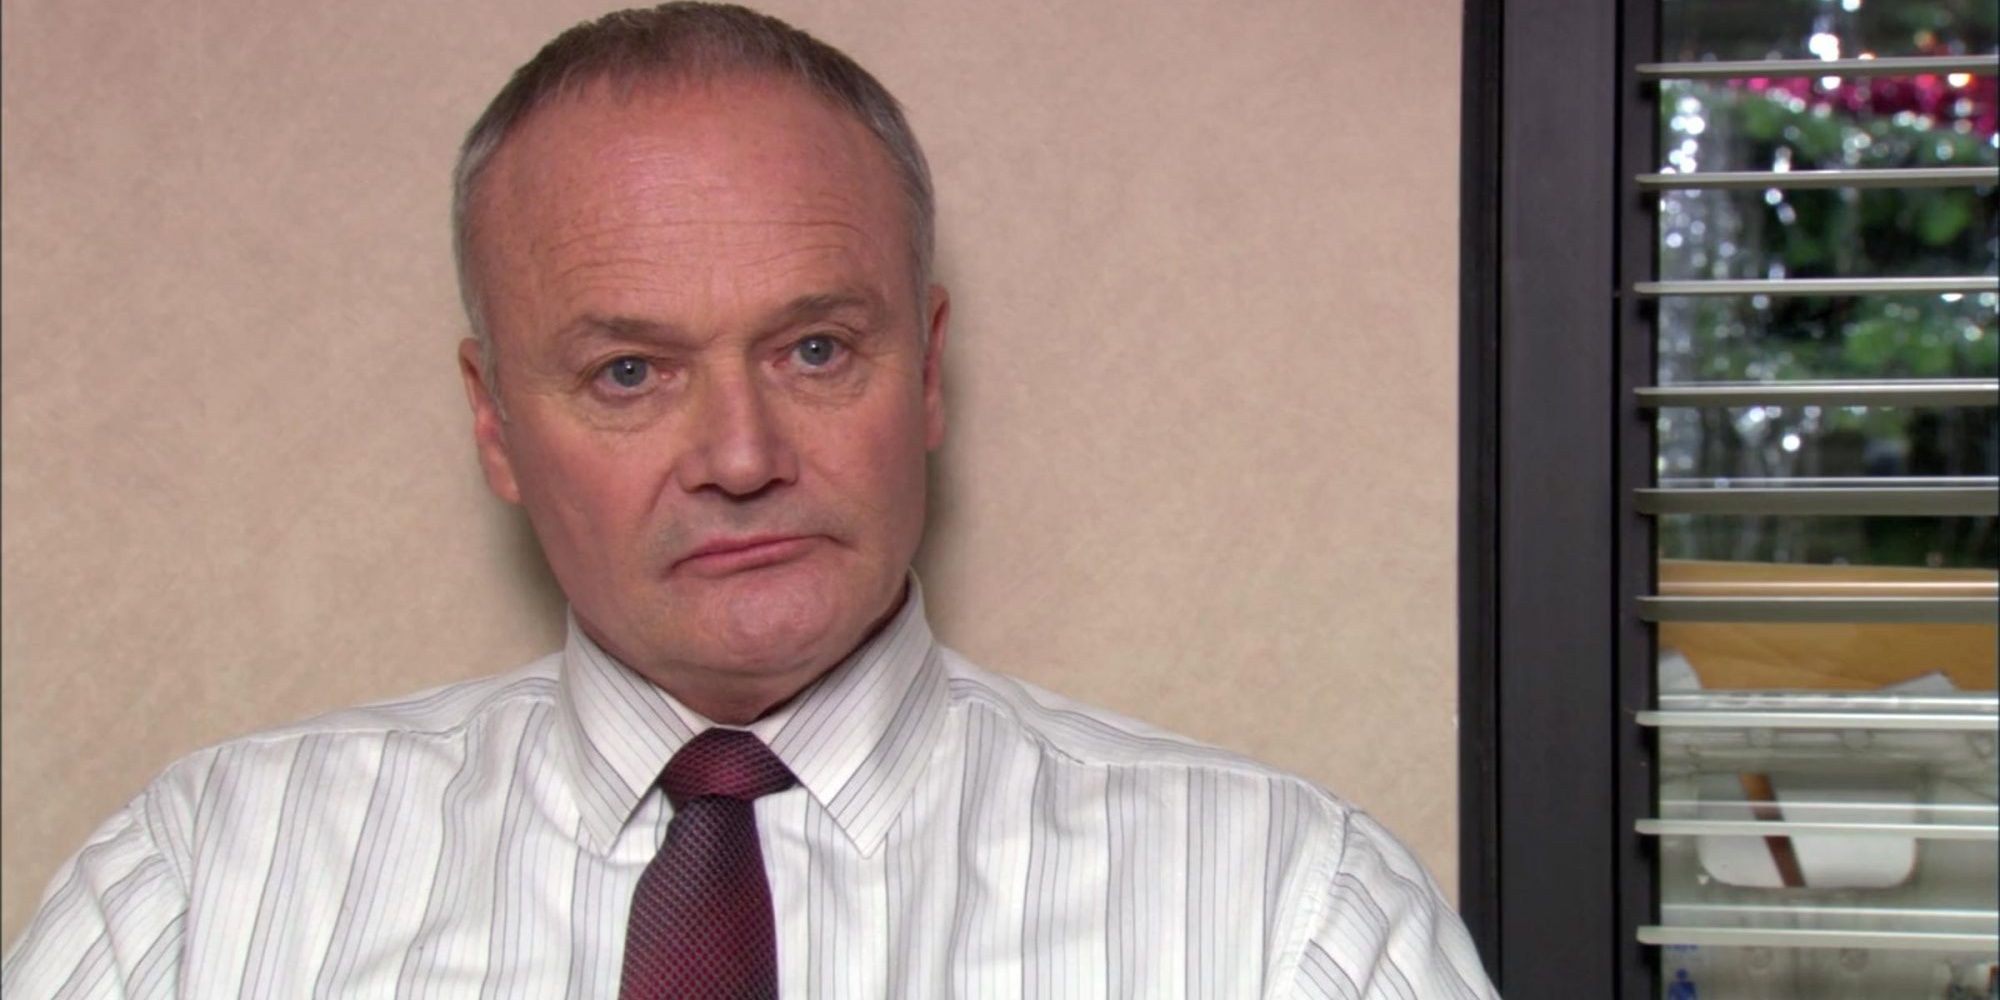 Creed Bratton gives an interview to camera on The Office.